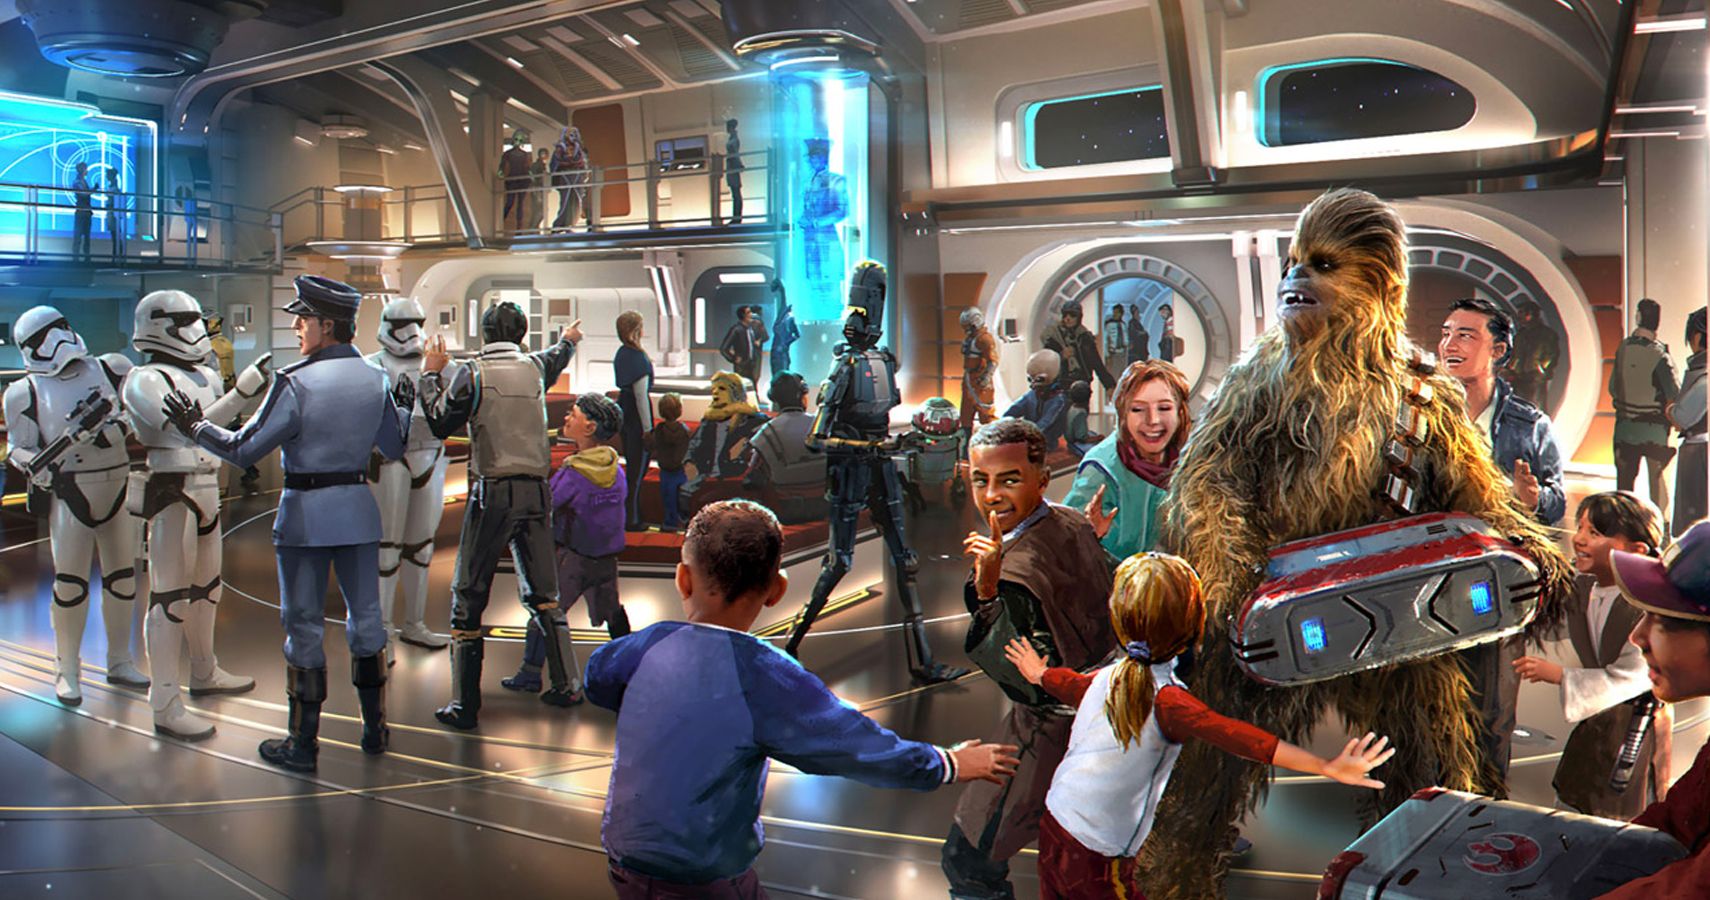 An Interactive ‘Star Wars’ Hotel Is Coming To Disney World Next Year